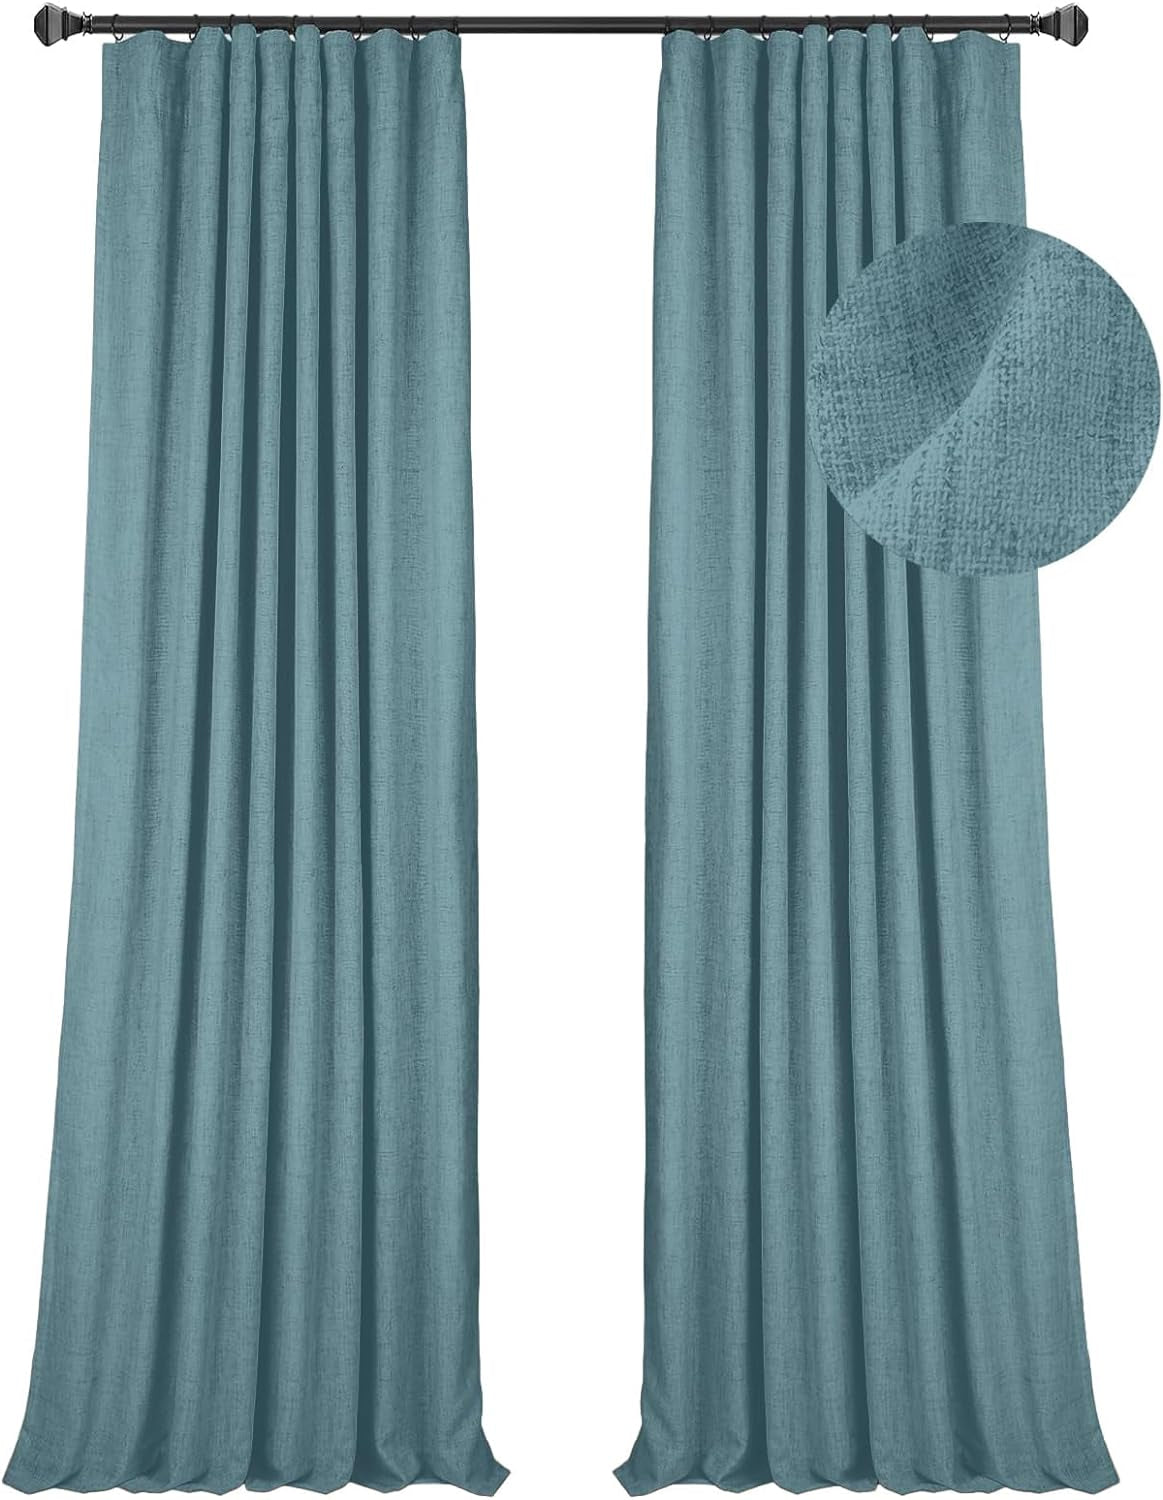 Zeerobee 100% Black Out Curtains for Bedroom Windows 84 Linen Blackout Curtains 84 Inch Length 2 Panels Set, Thermal Insulated Black Out Curtains & Drapes, W50 X L84, Beige  zeerobee 23 Teal 50"W X 96"L 